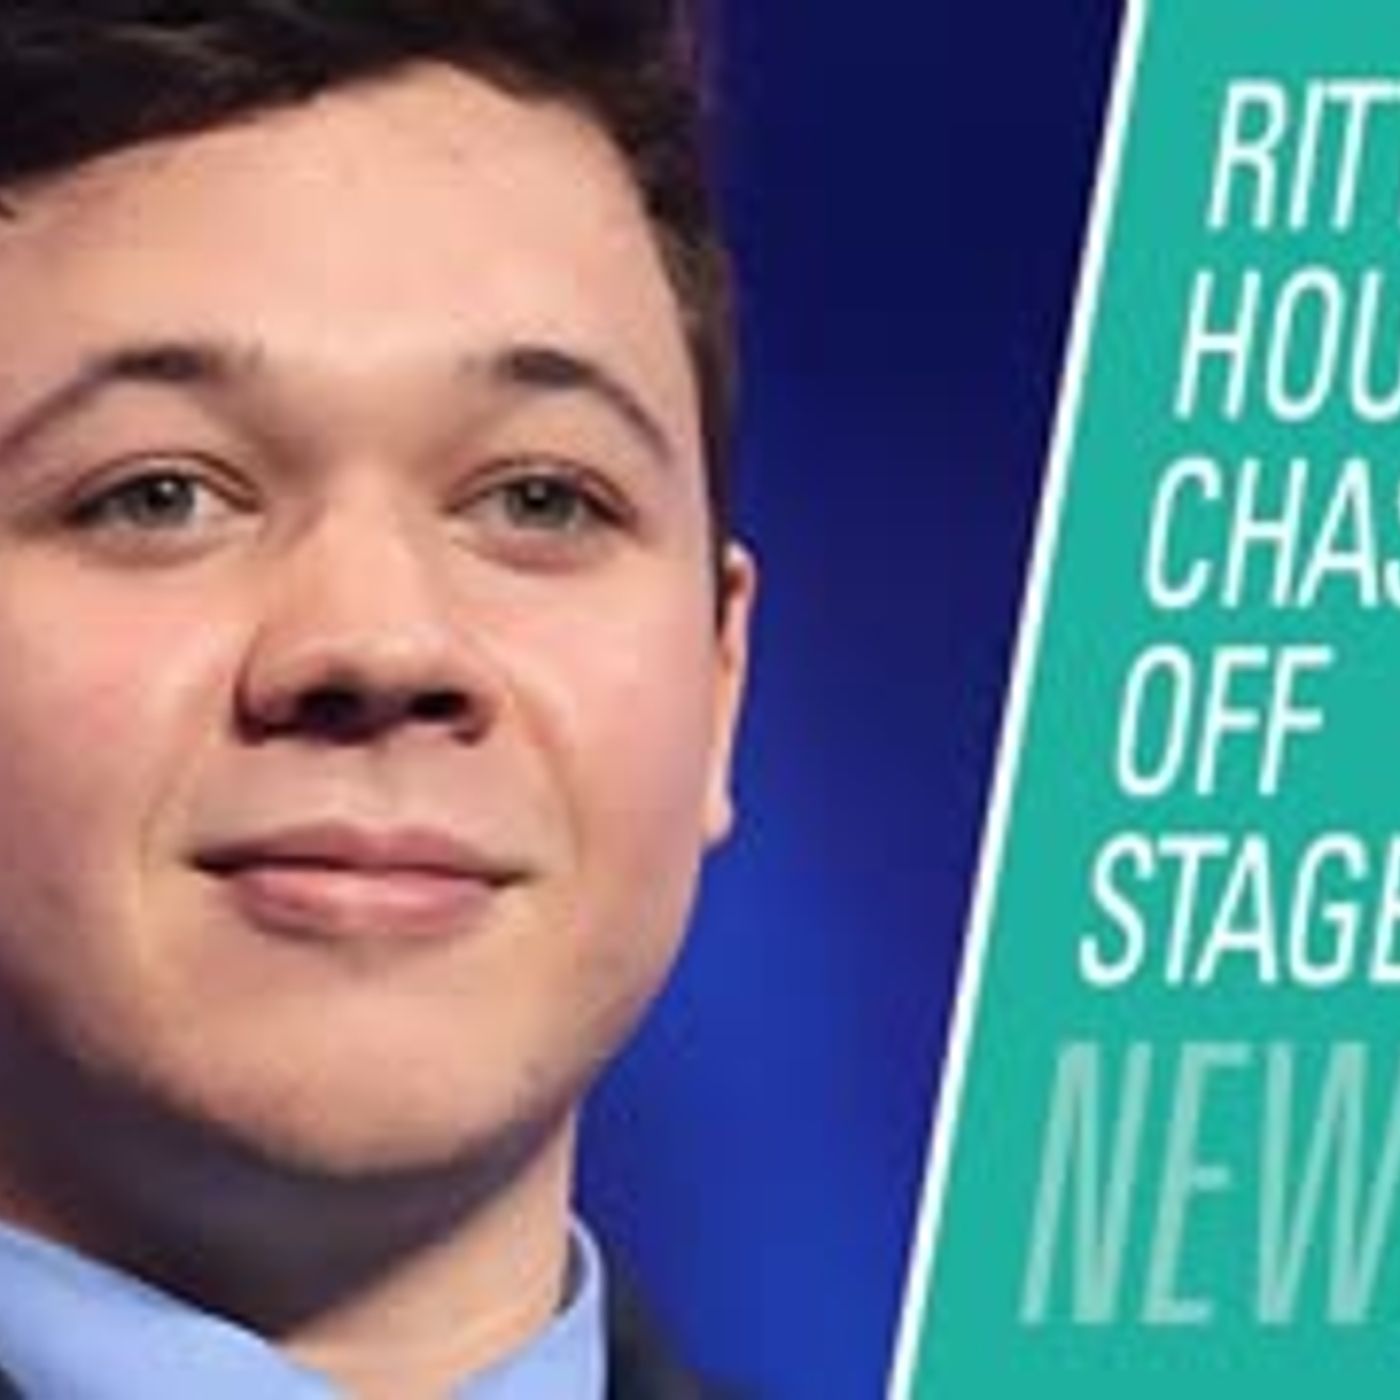 Redefining a "Bloodbath", Rittenhouse Chased Off Stage | HBR News 449